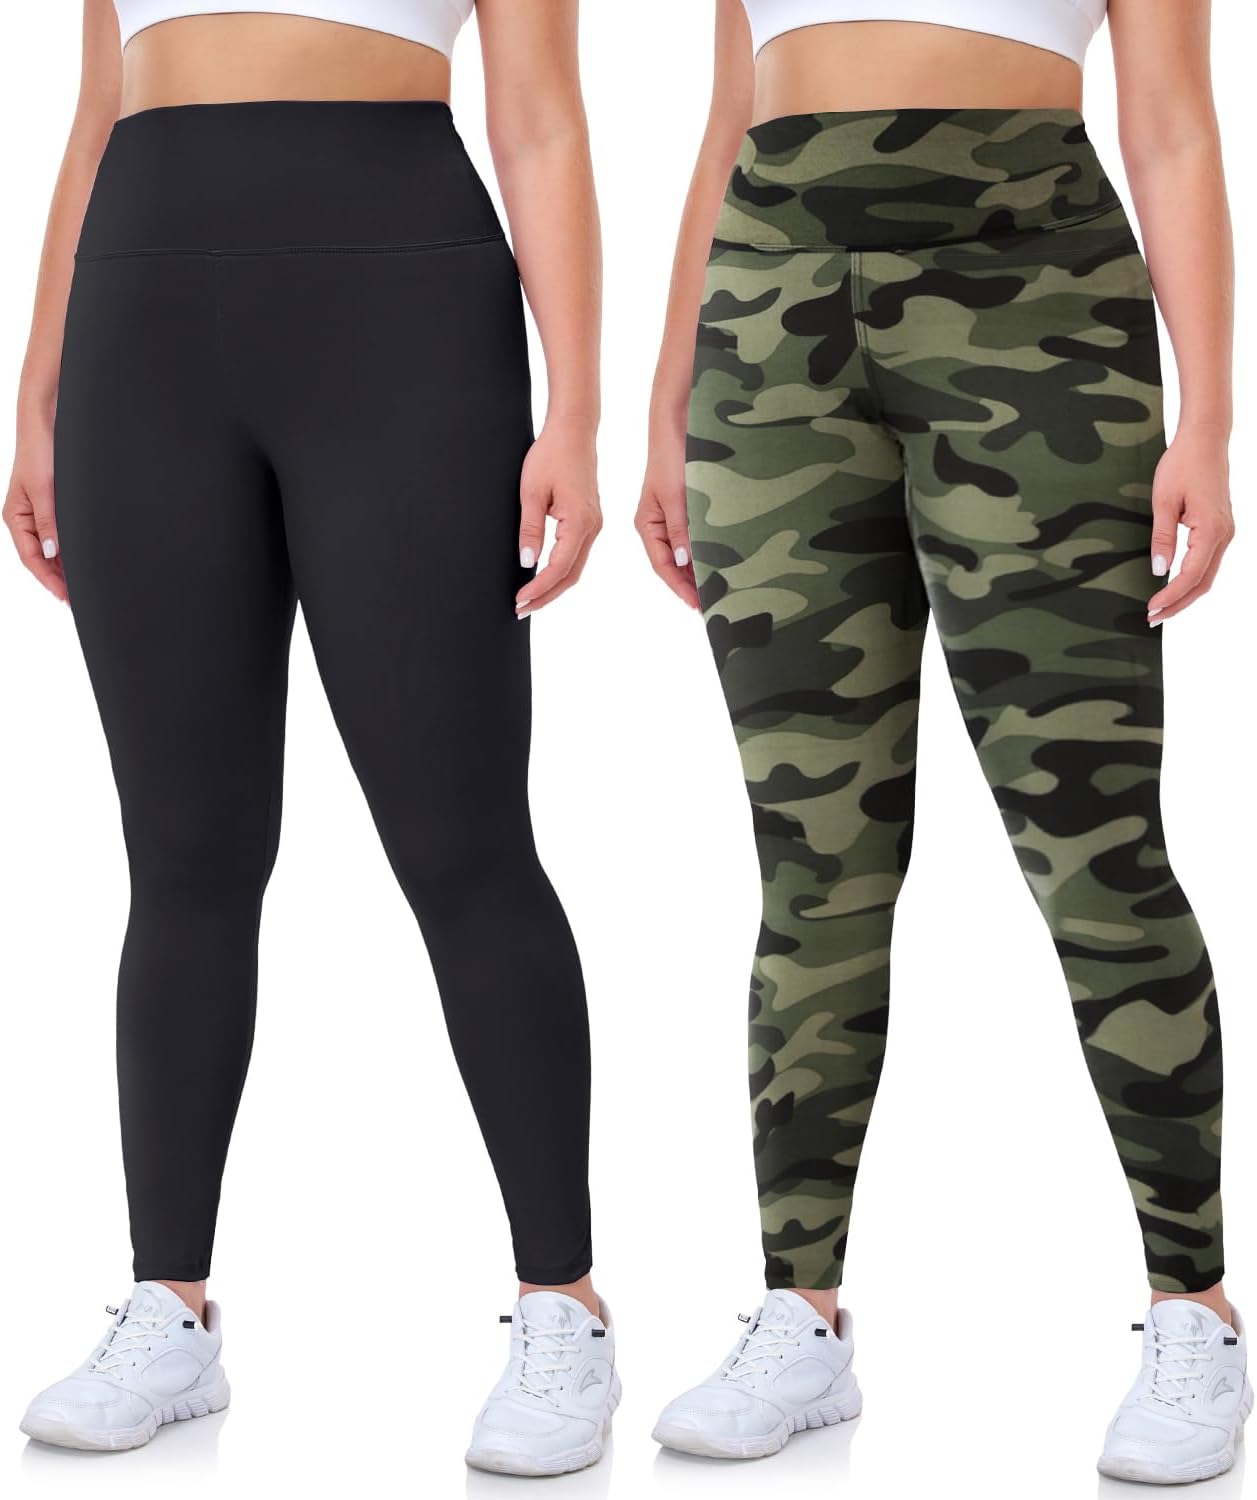 Hi Clasmix 2 Pack Plus Size Leggings for Women Tummy Control-High Waisted Super Soft Workout Yoga Athletic Pants 3X 4X